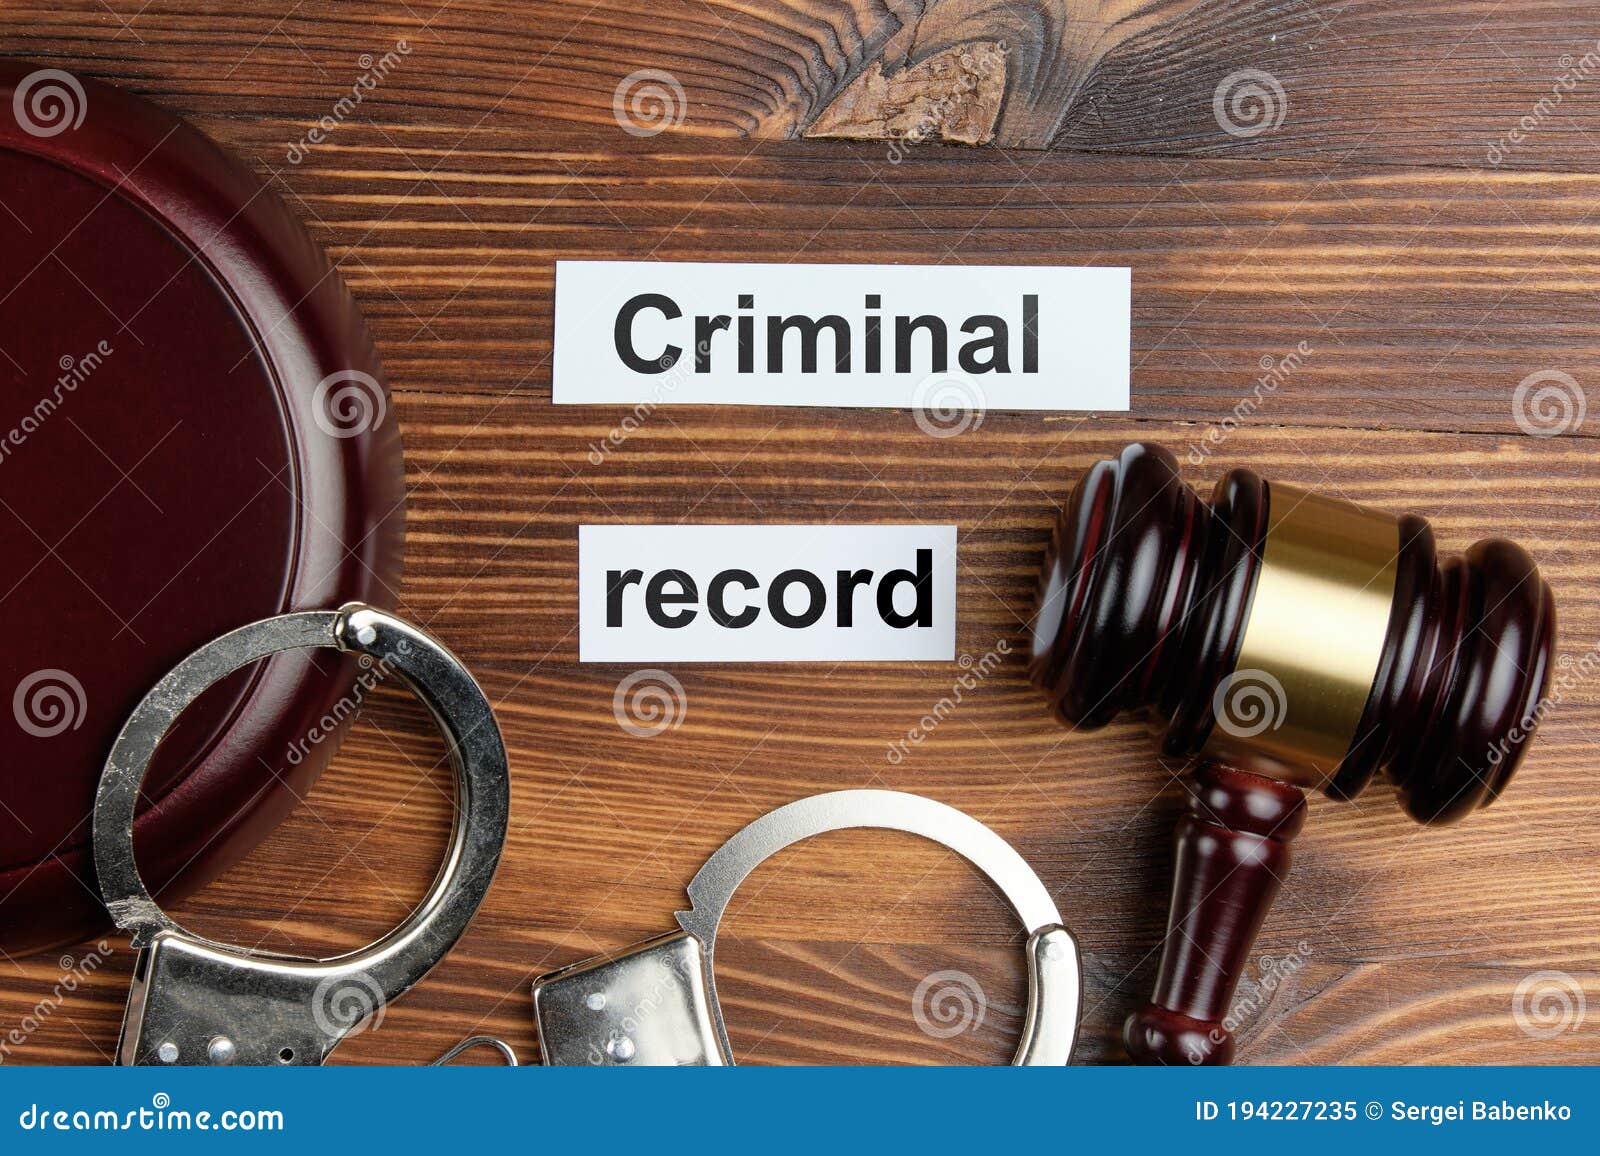 The Concept of Criminal Record in Court Cases Stock Image - Image of